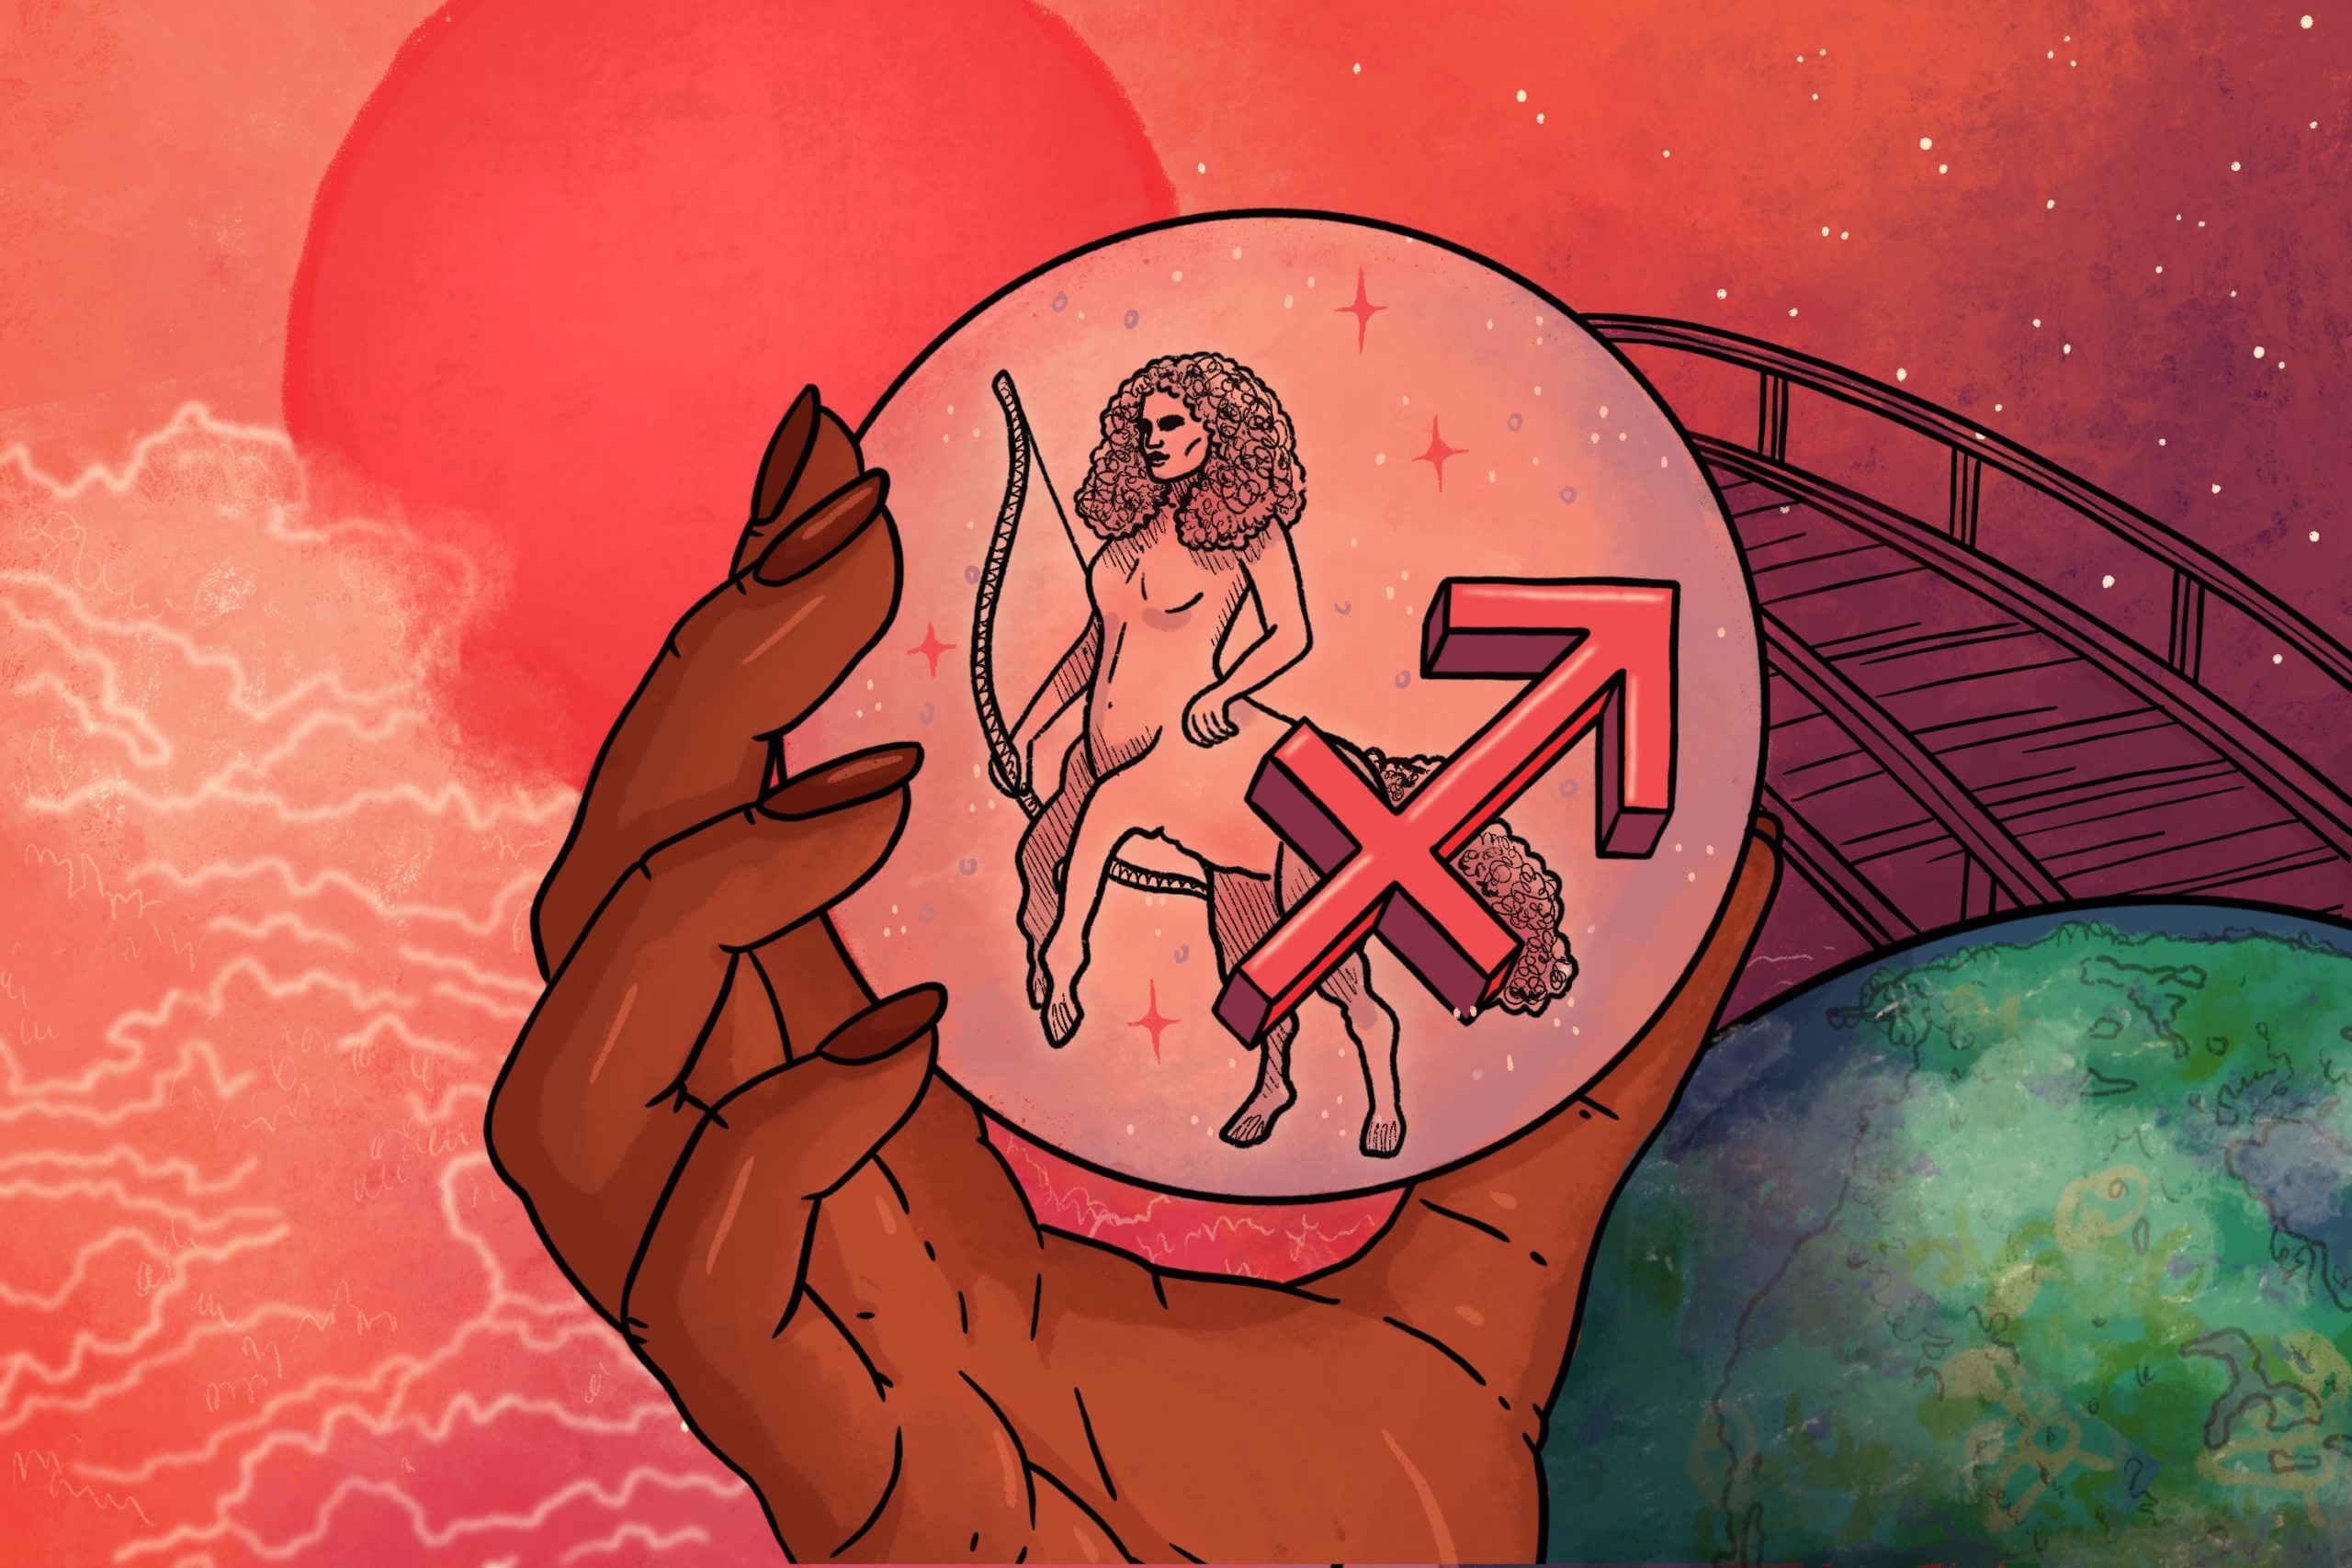 gal-dem monthly horoscopes: Sagittarius season sees the possibility of an end to the patriarchy